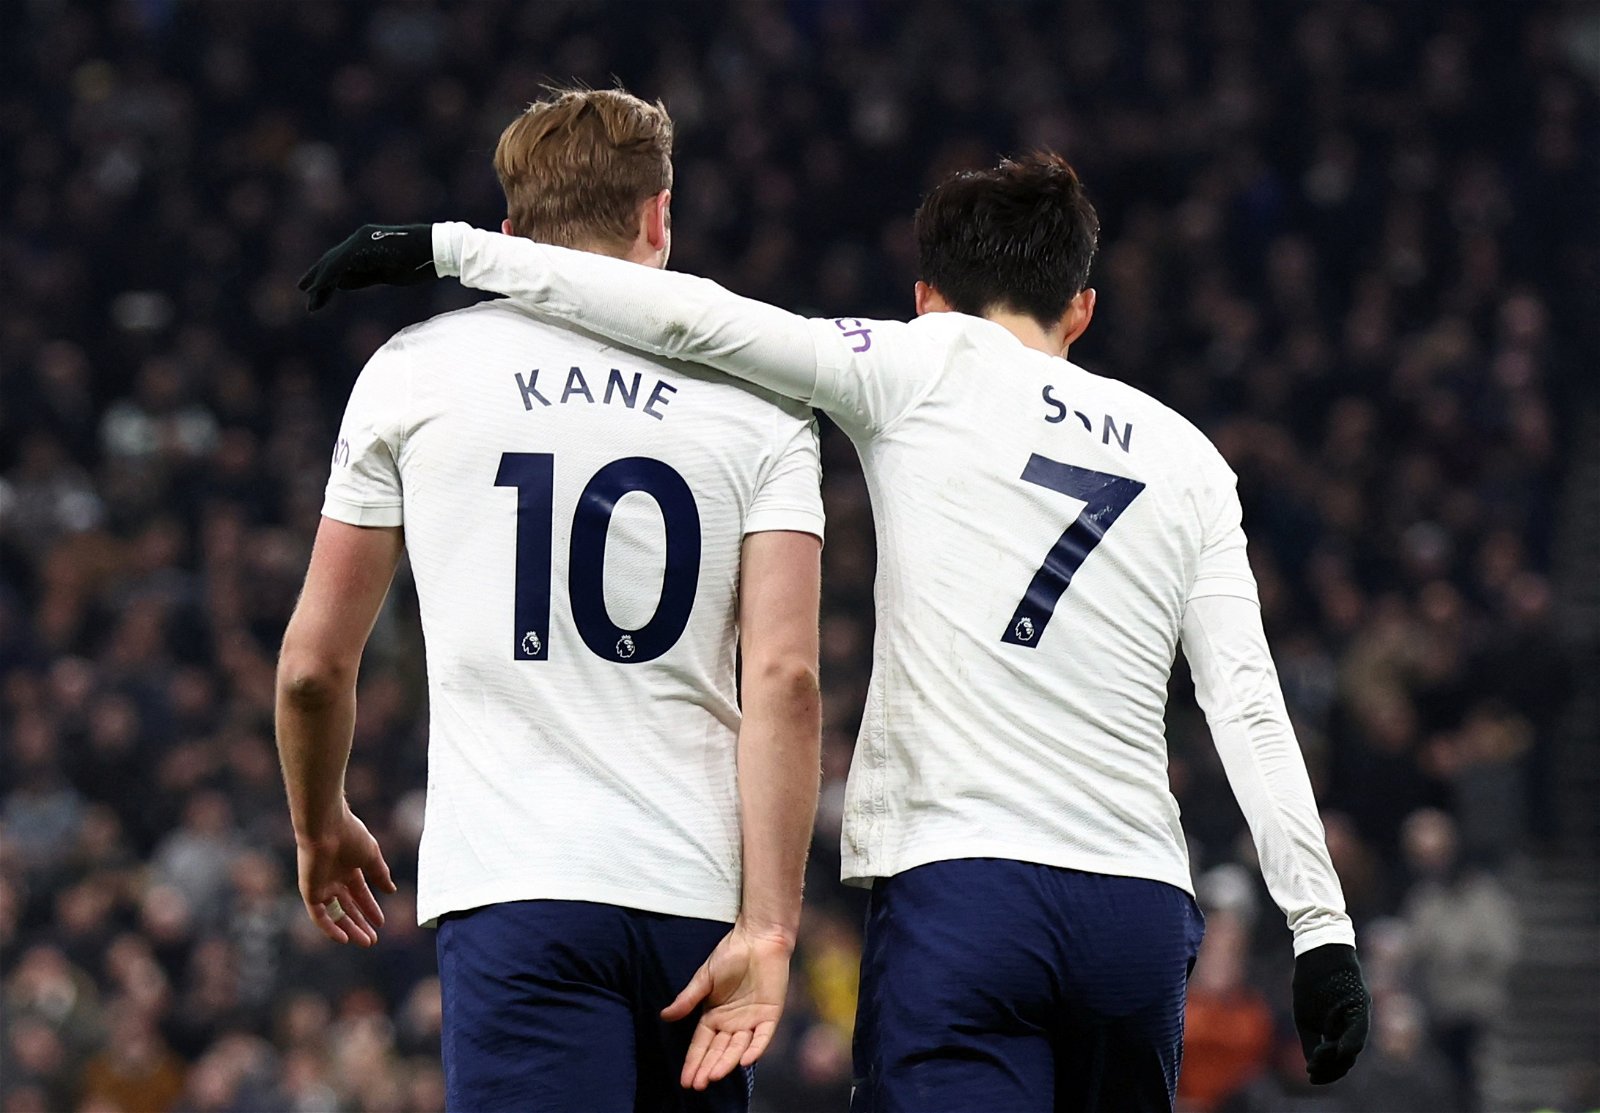 Paul Merson believes Spurs are now favourites for top-four spot